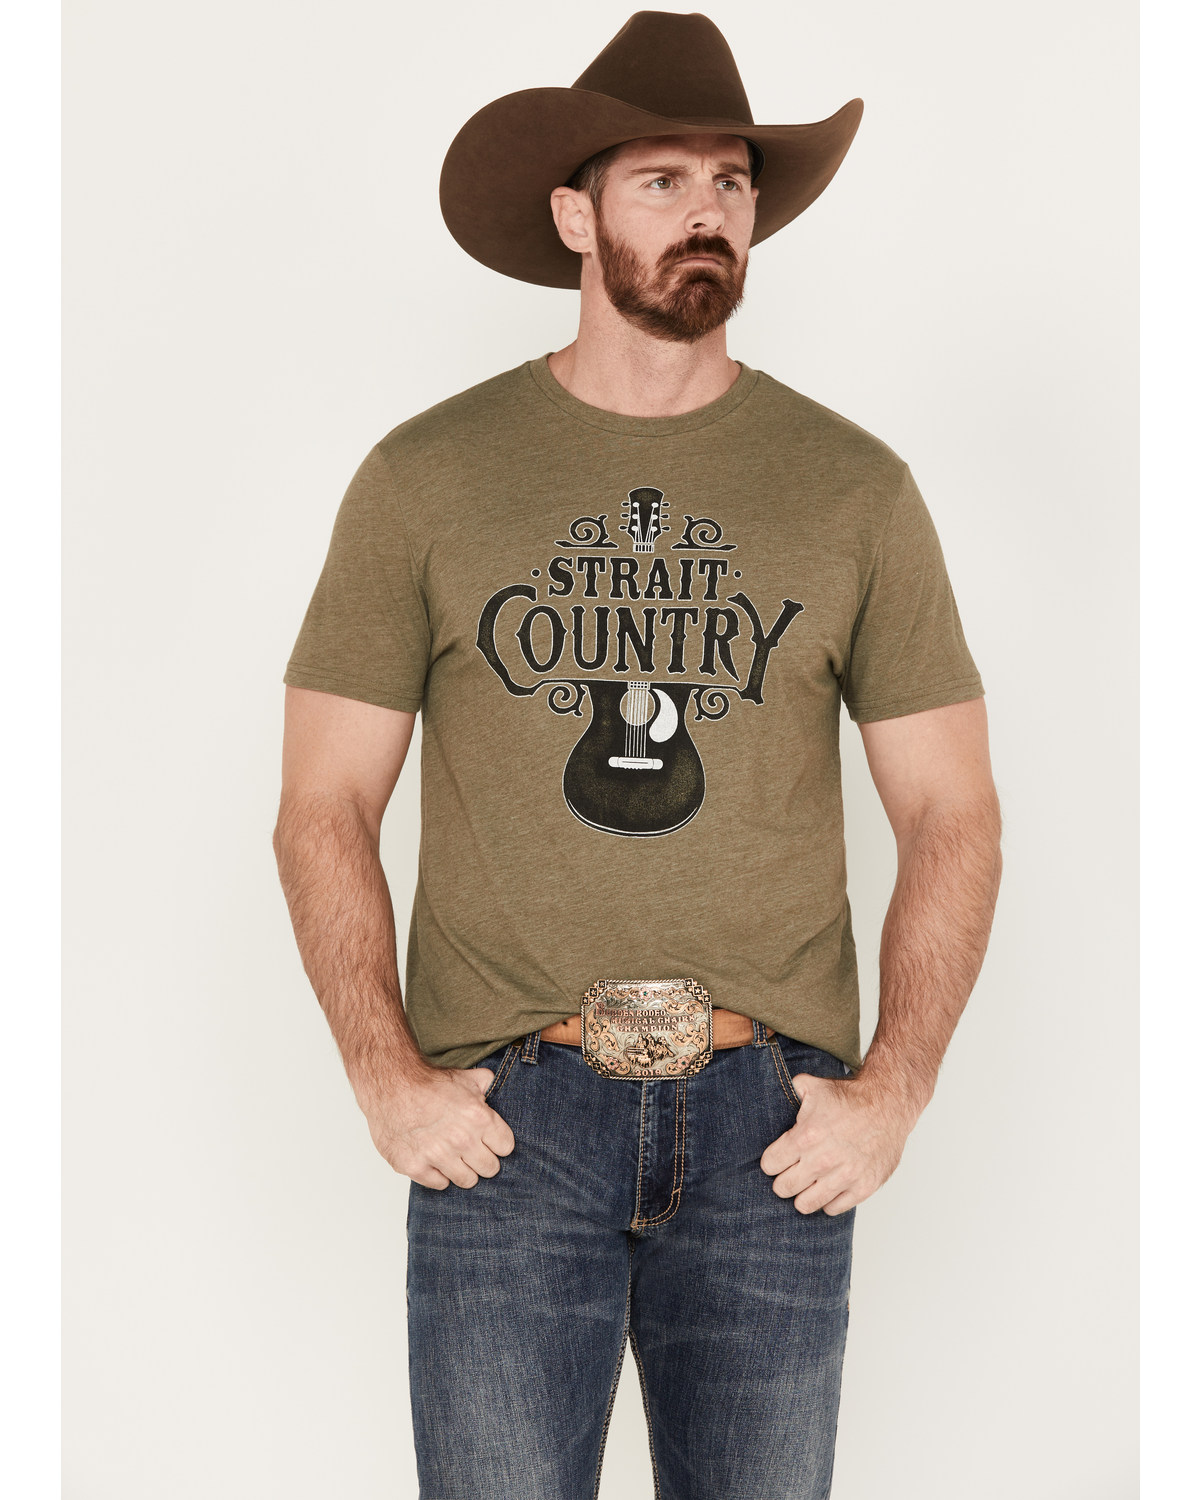 George Strait by Wrangler Men's Country Guitar Short Sleeve Graphic T-Shirt